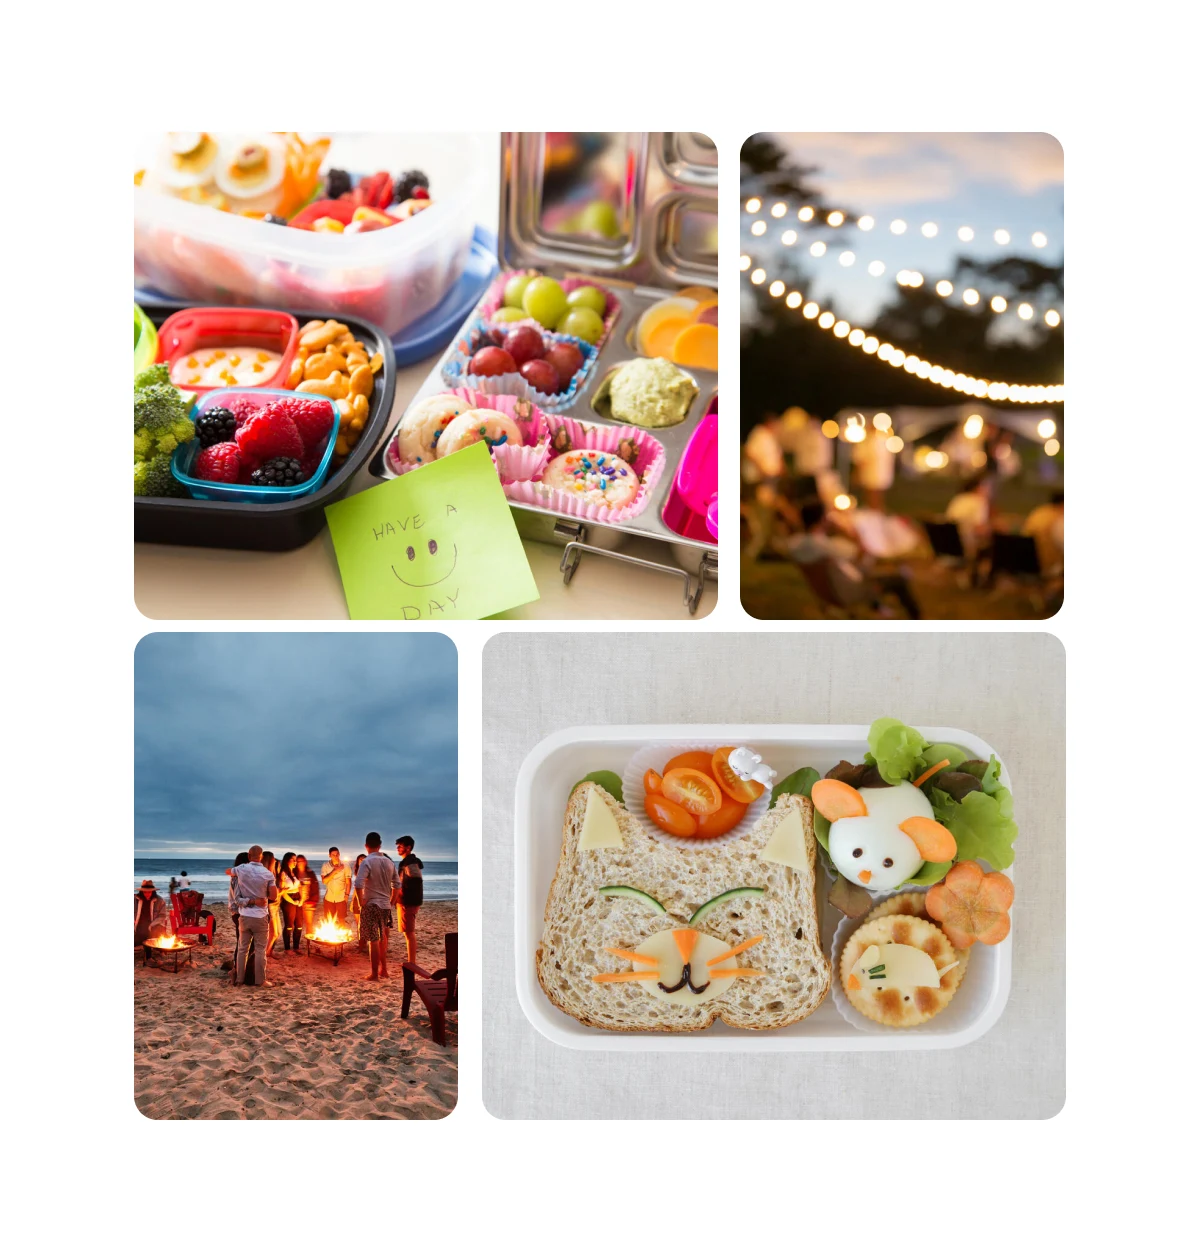  Pin grid featuring lunch box meals, blurry photo of string lights in a backyard, a group of people at a beach bonfire, and a bento box lunch with sandwich shaped like a cat..